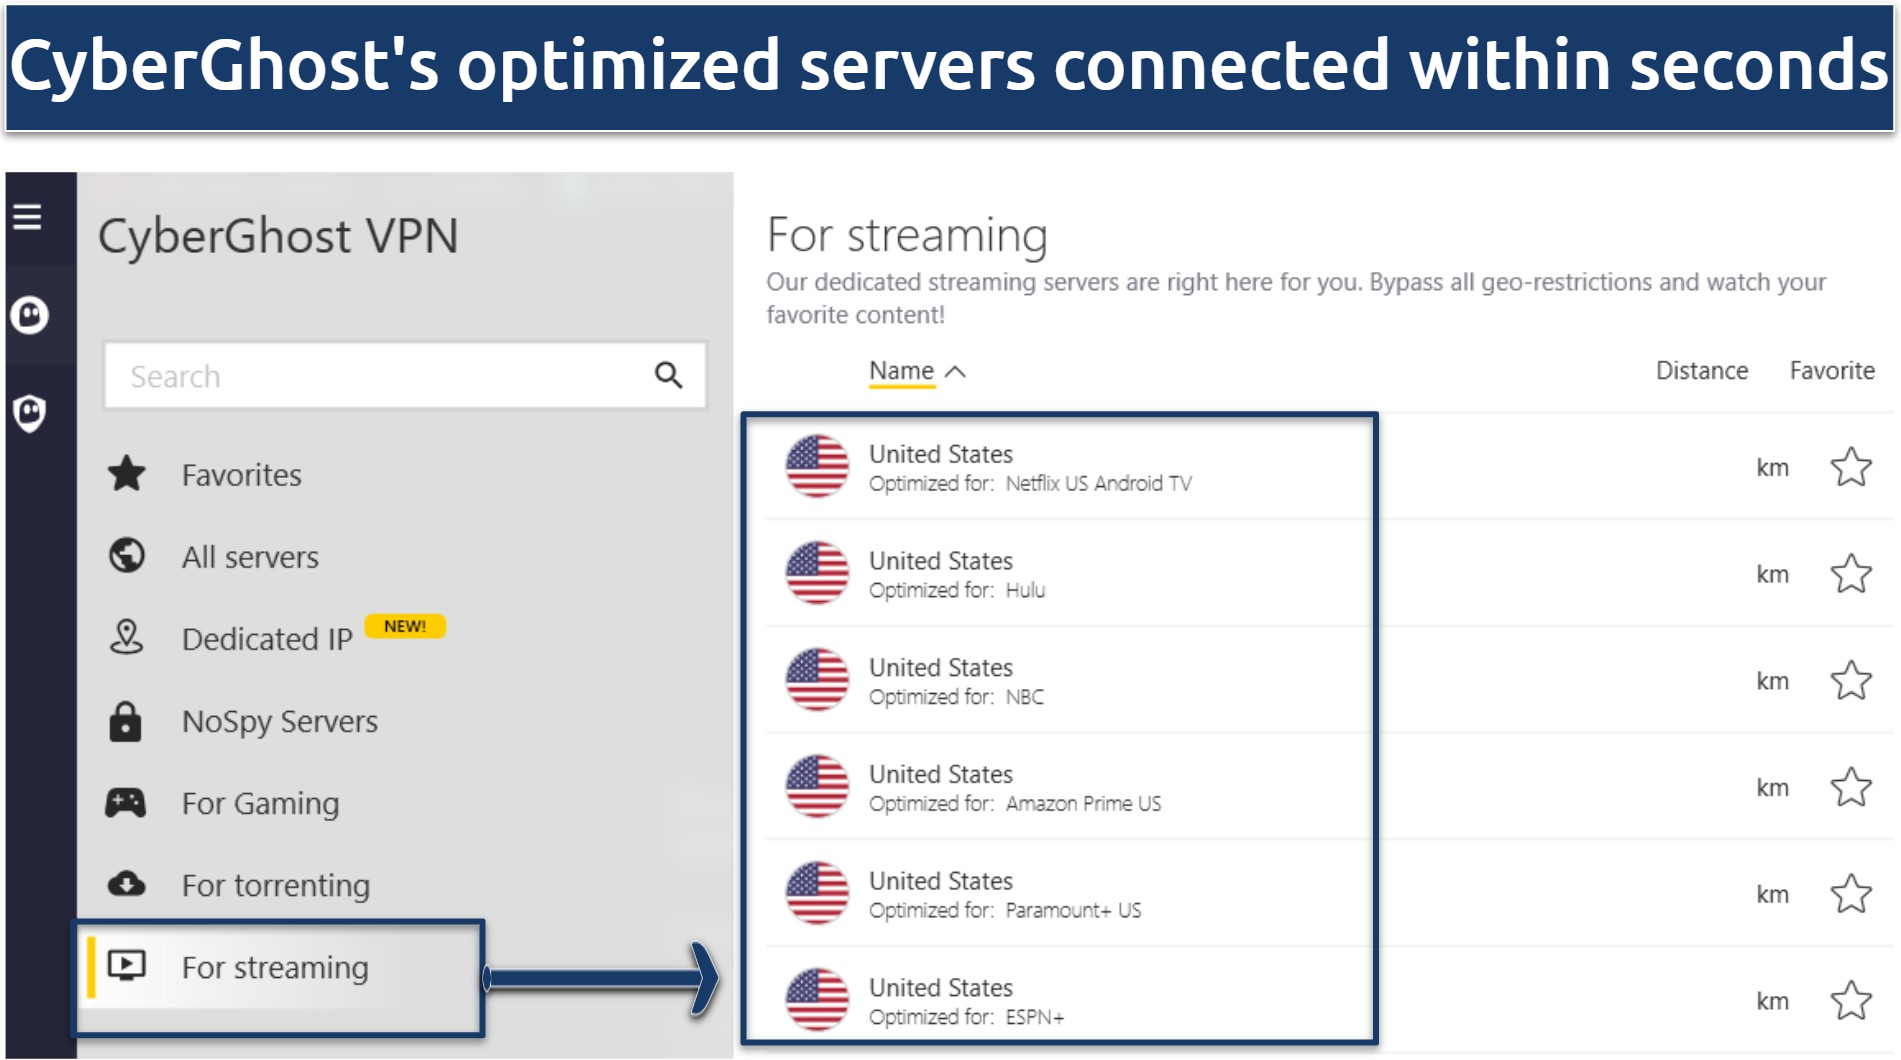 A screenshot showing CyberGhost offers specialized servers for streaming